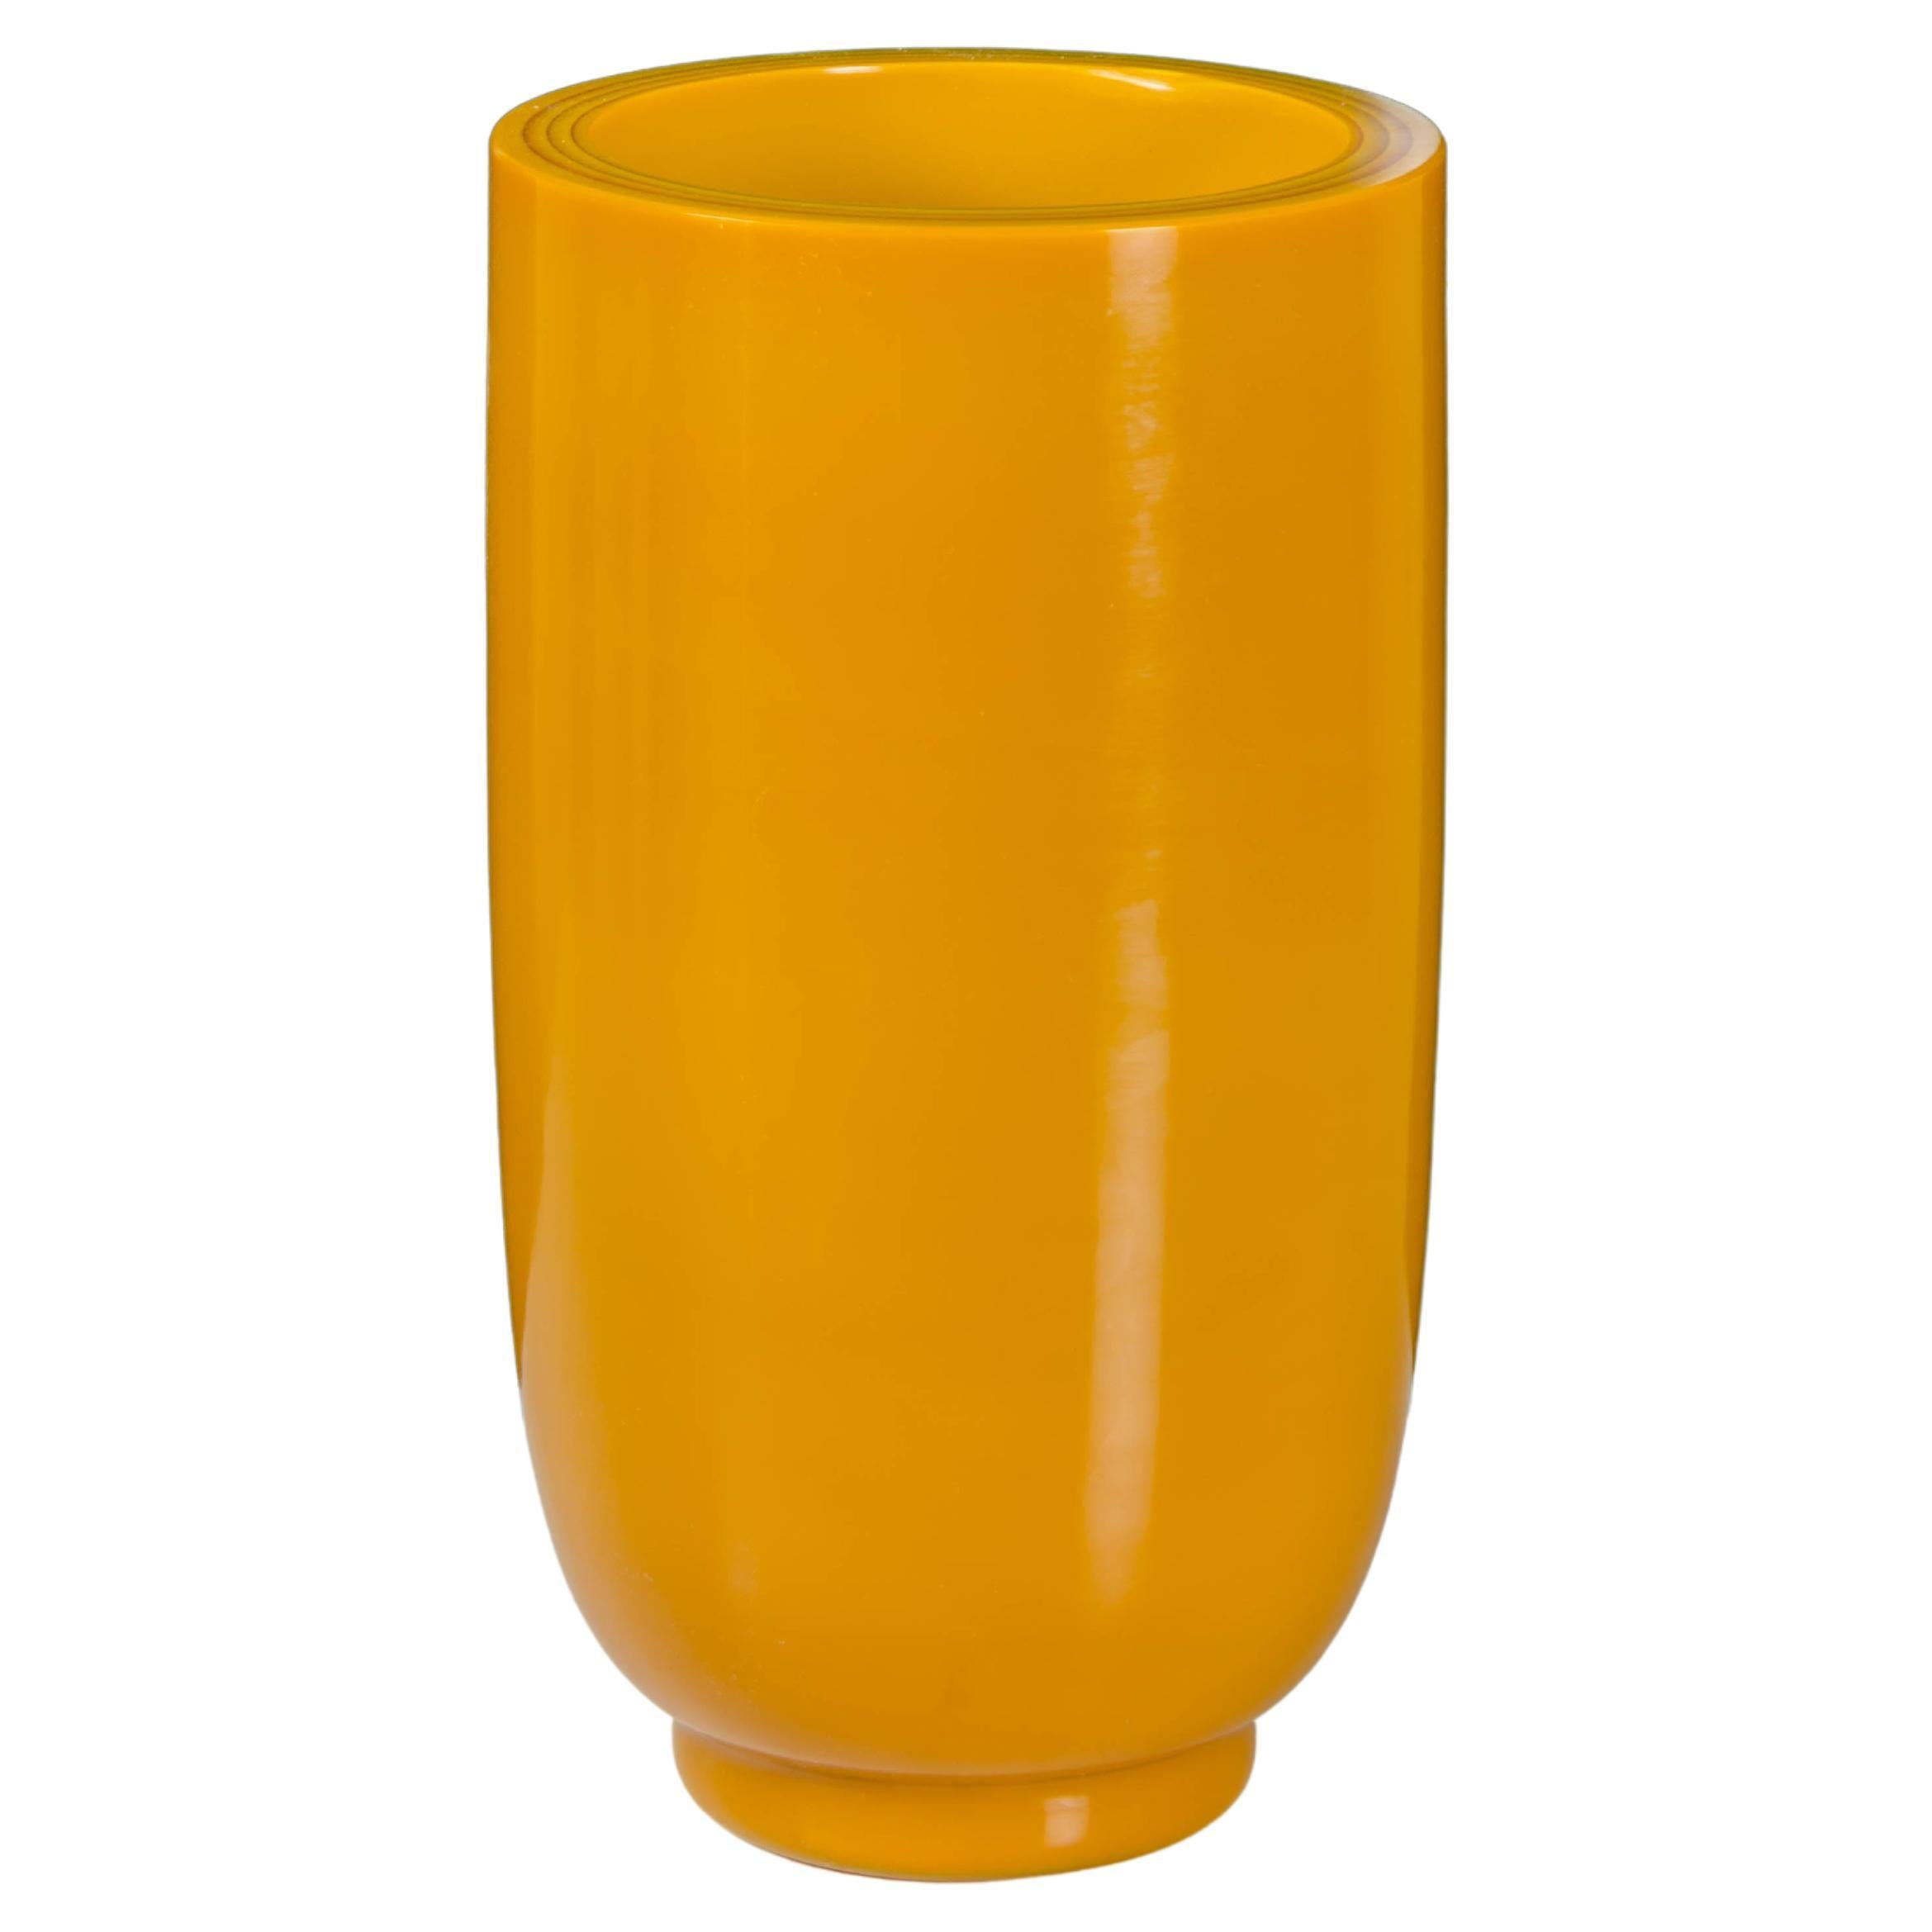 Contemporary Yuan Bei Ping Vase in Yellow Peking Glass by Robert Kuo